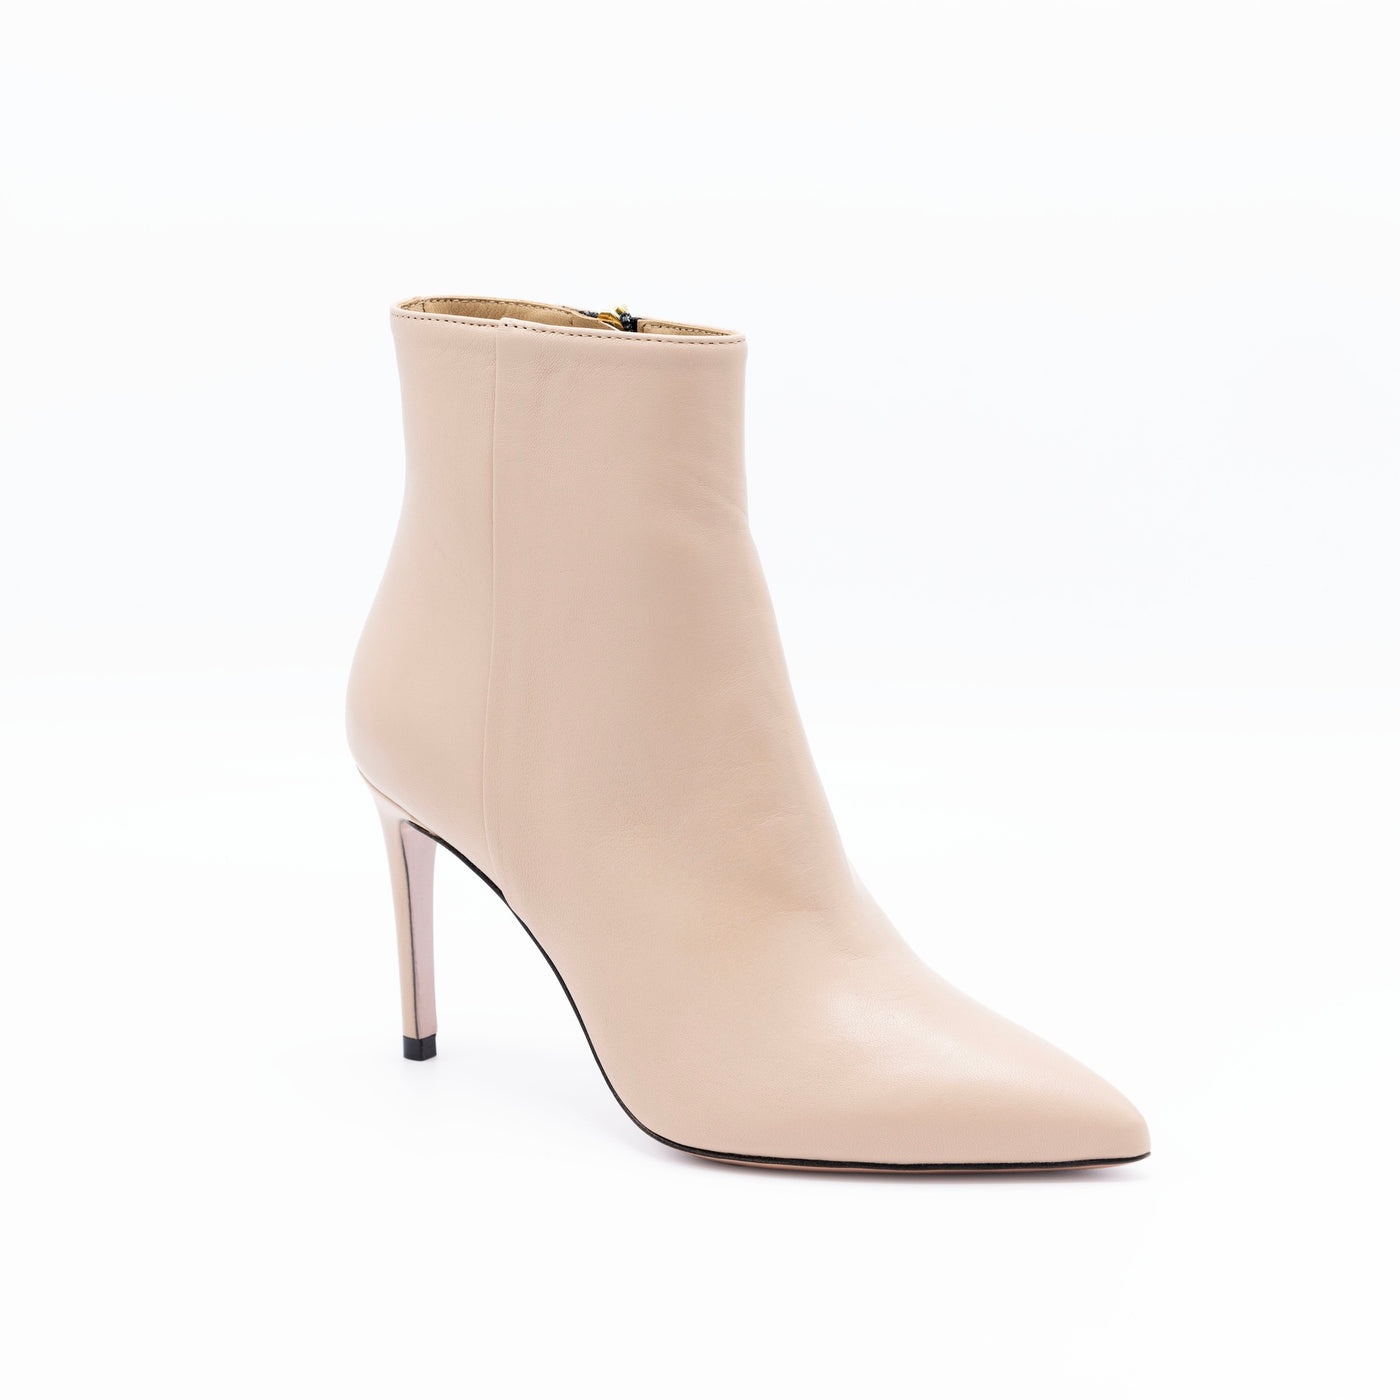 Beige leather pointy toe ankle boots with slim heel